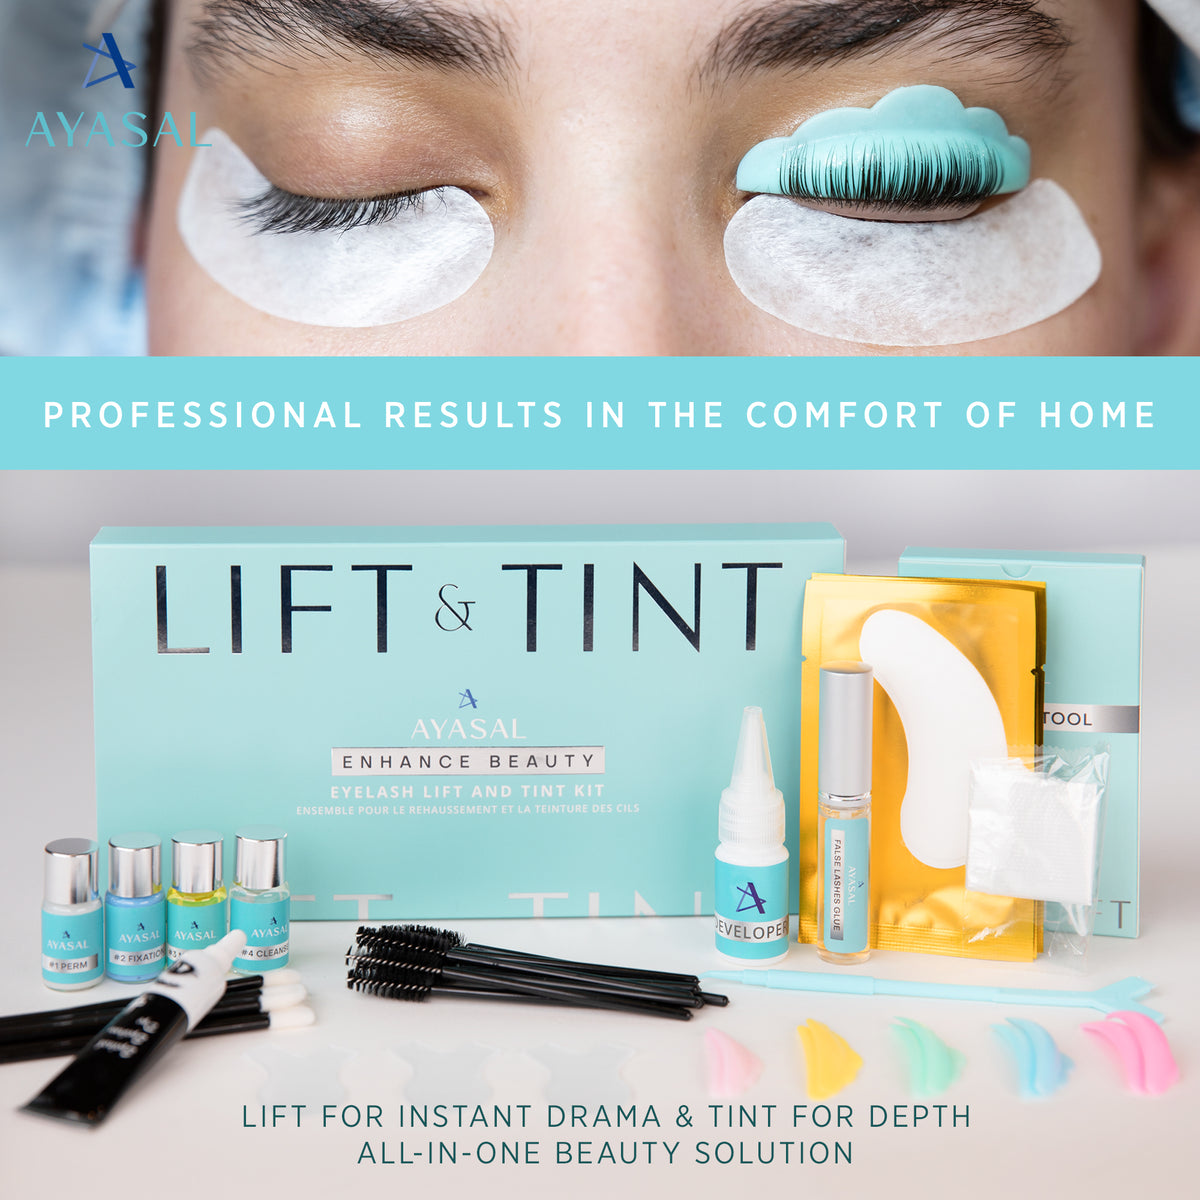 AYASAL Lash Lift and Tint Kit: Eyelash Lift & Tint Kit - With Detailed Instruction Eyelash Perm Kit - Easy for Beginner and Professional Lash Perm Kit - Achieve Salon-Quality Lashes Lift with Safe and Effective Resul